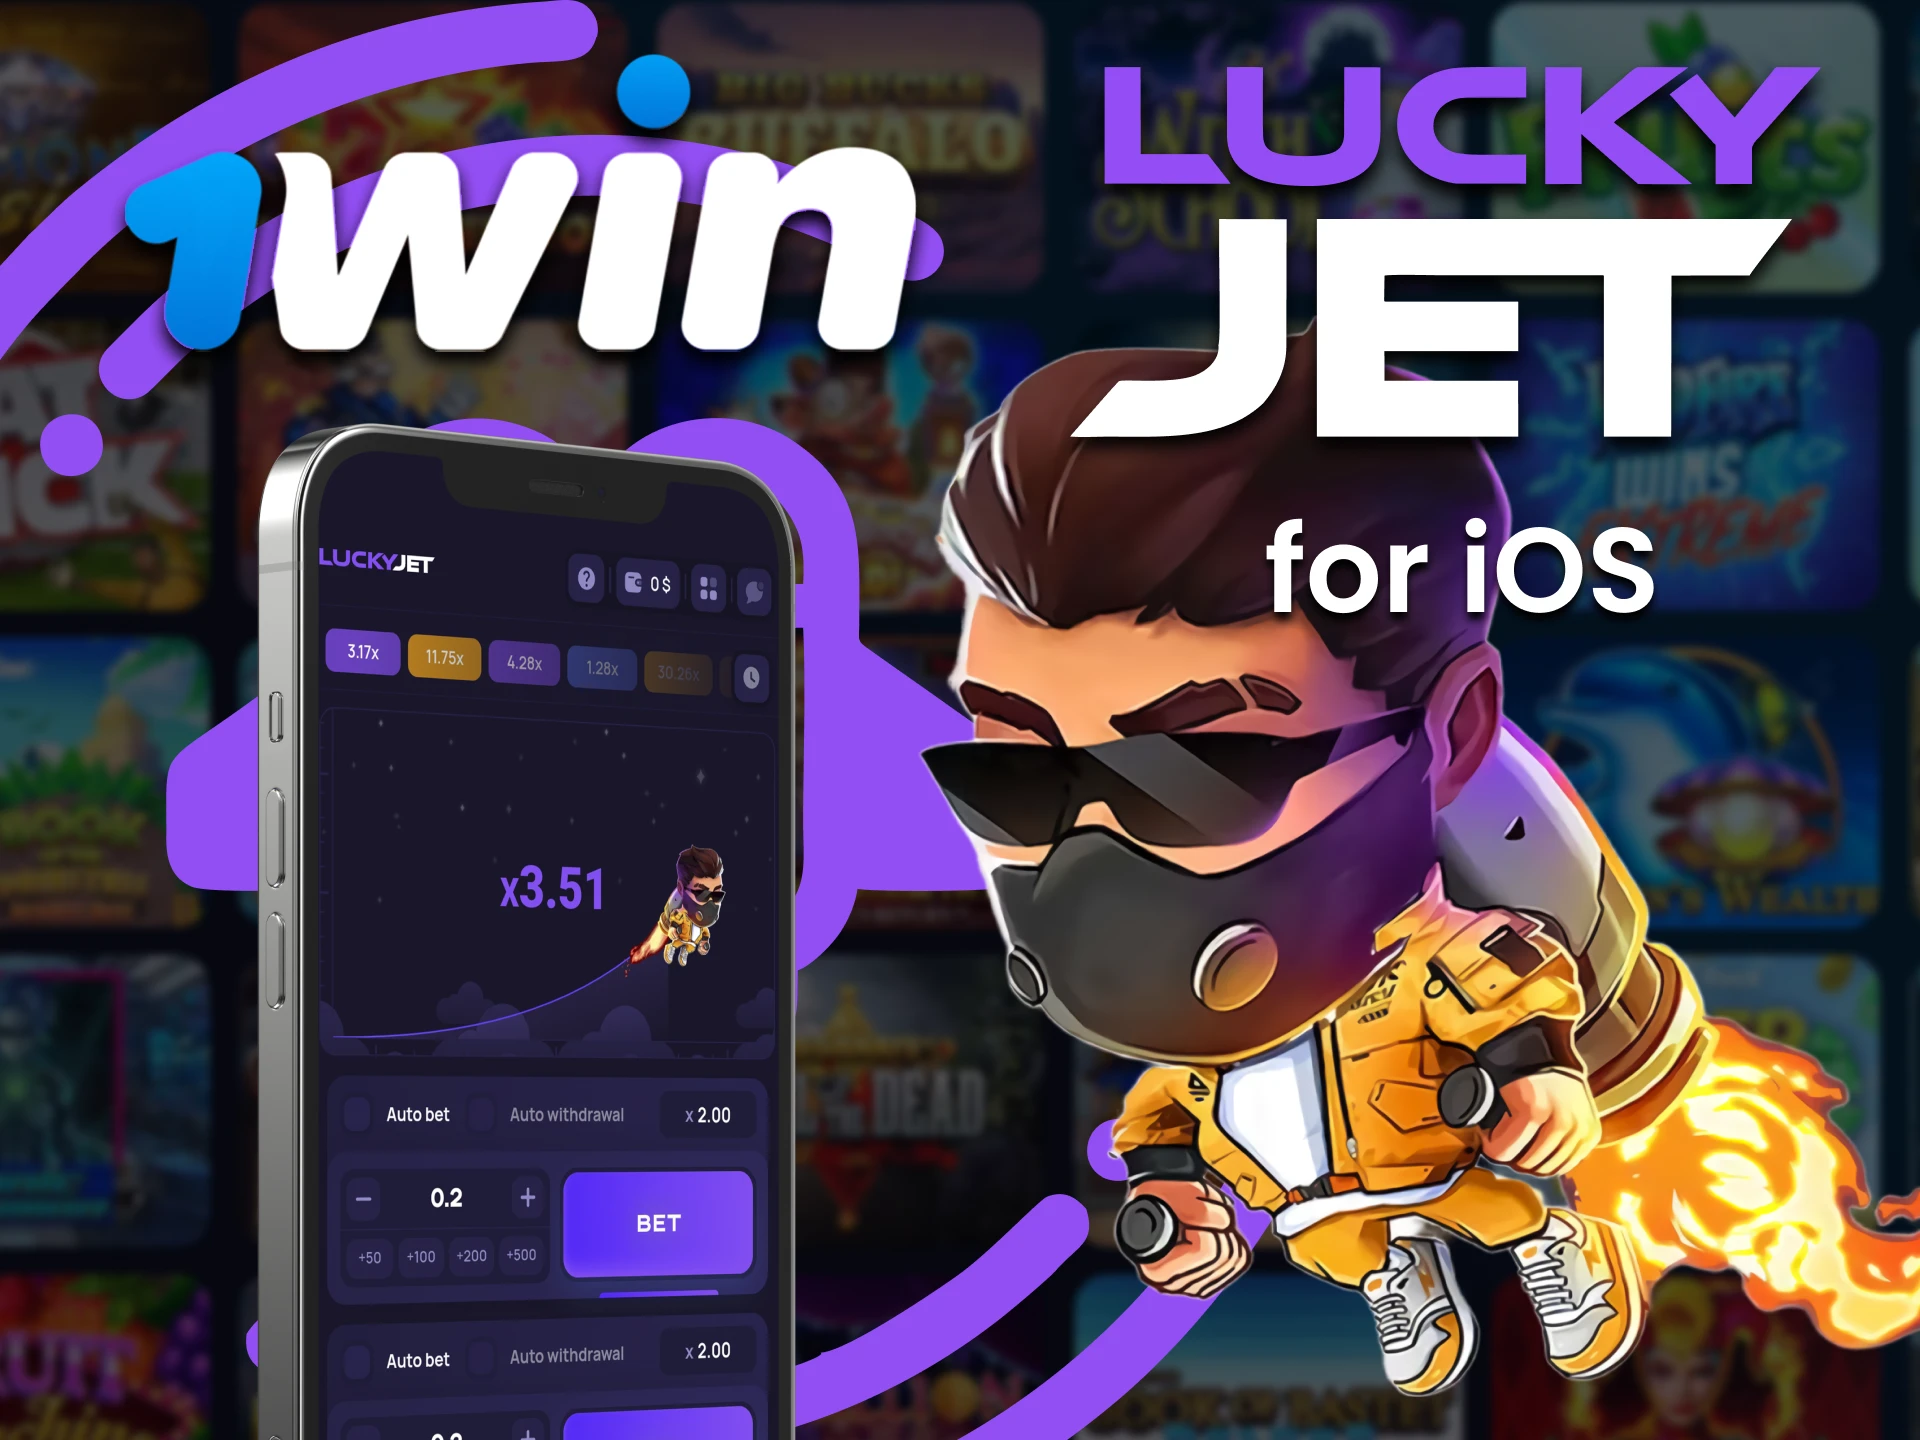 Download the 1Win app to play Lucky Jet on your iOS device.